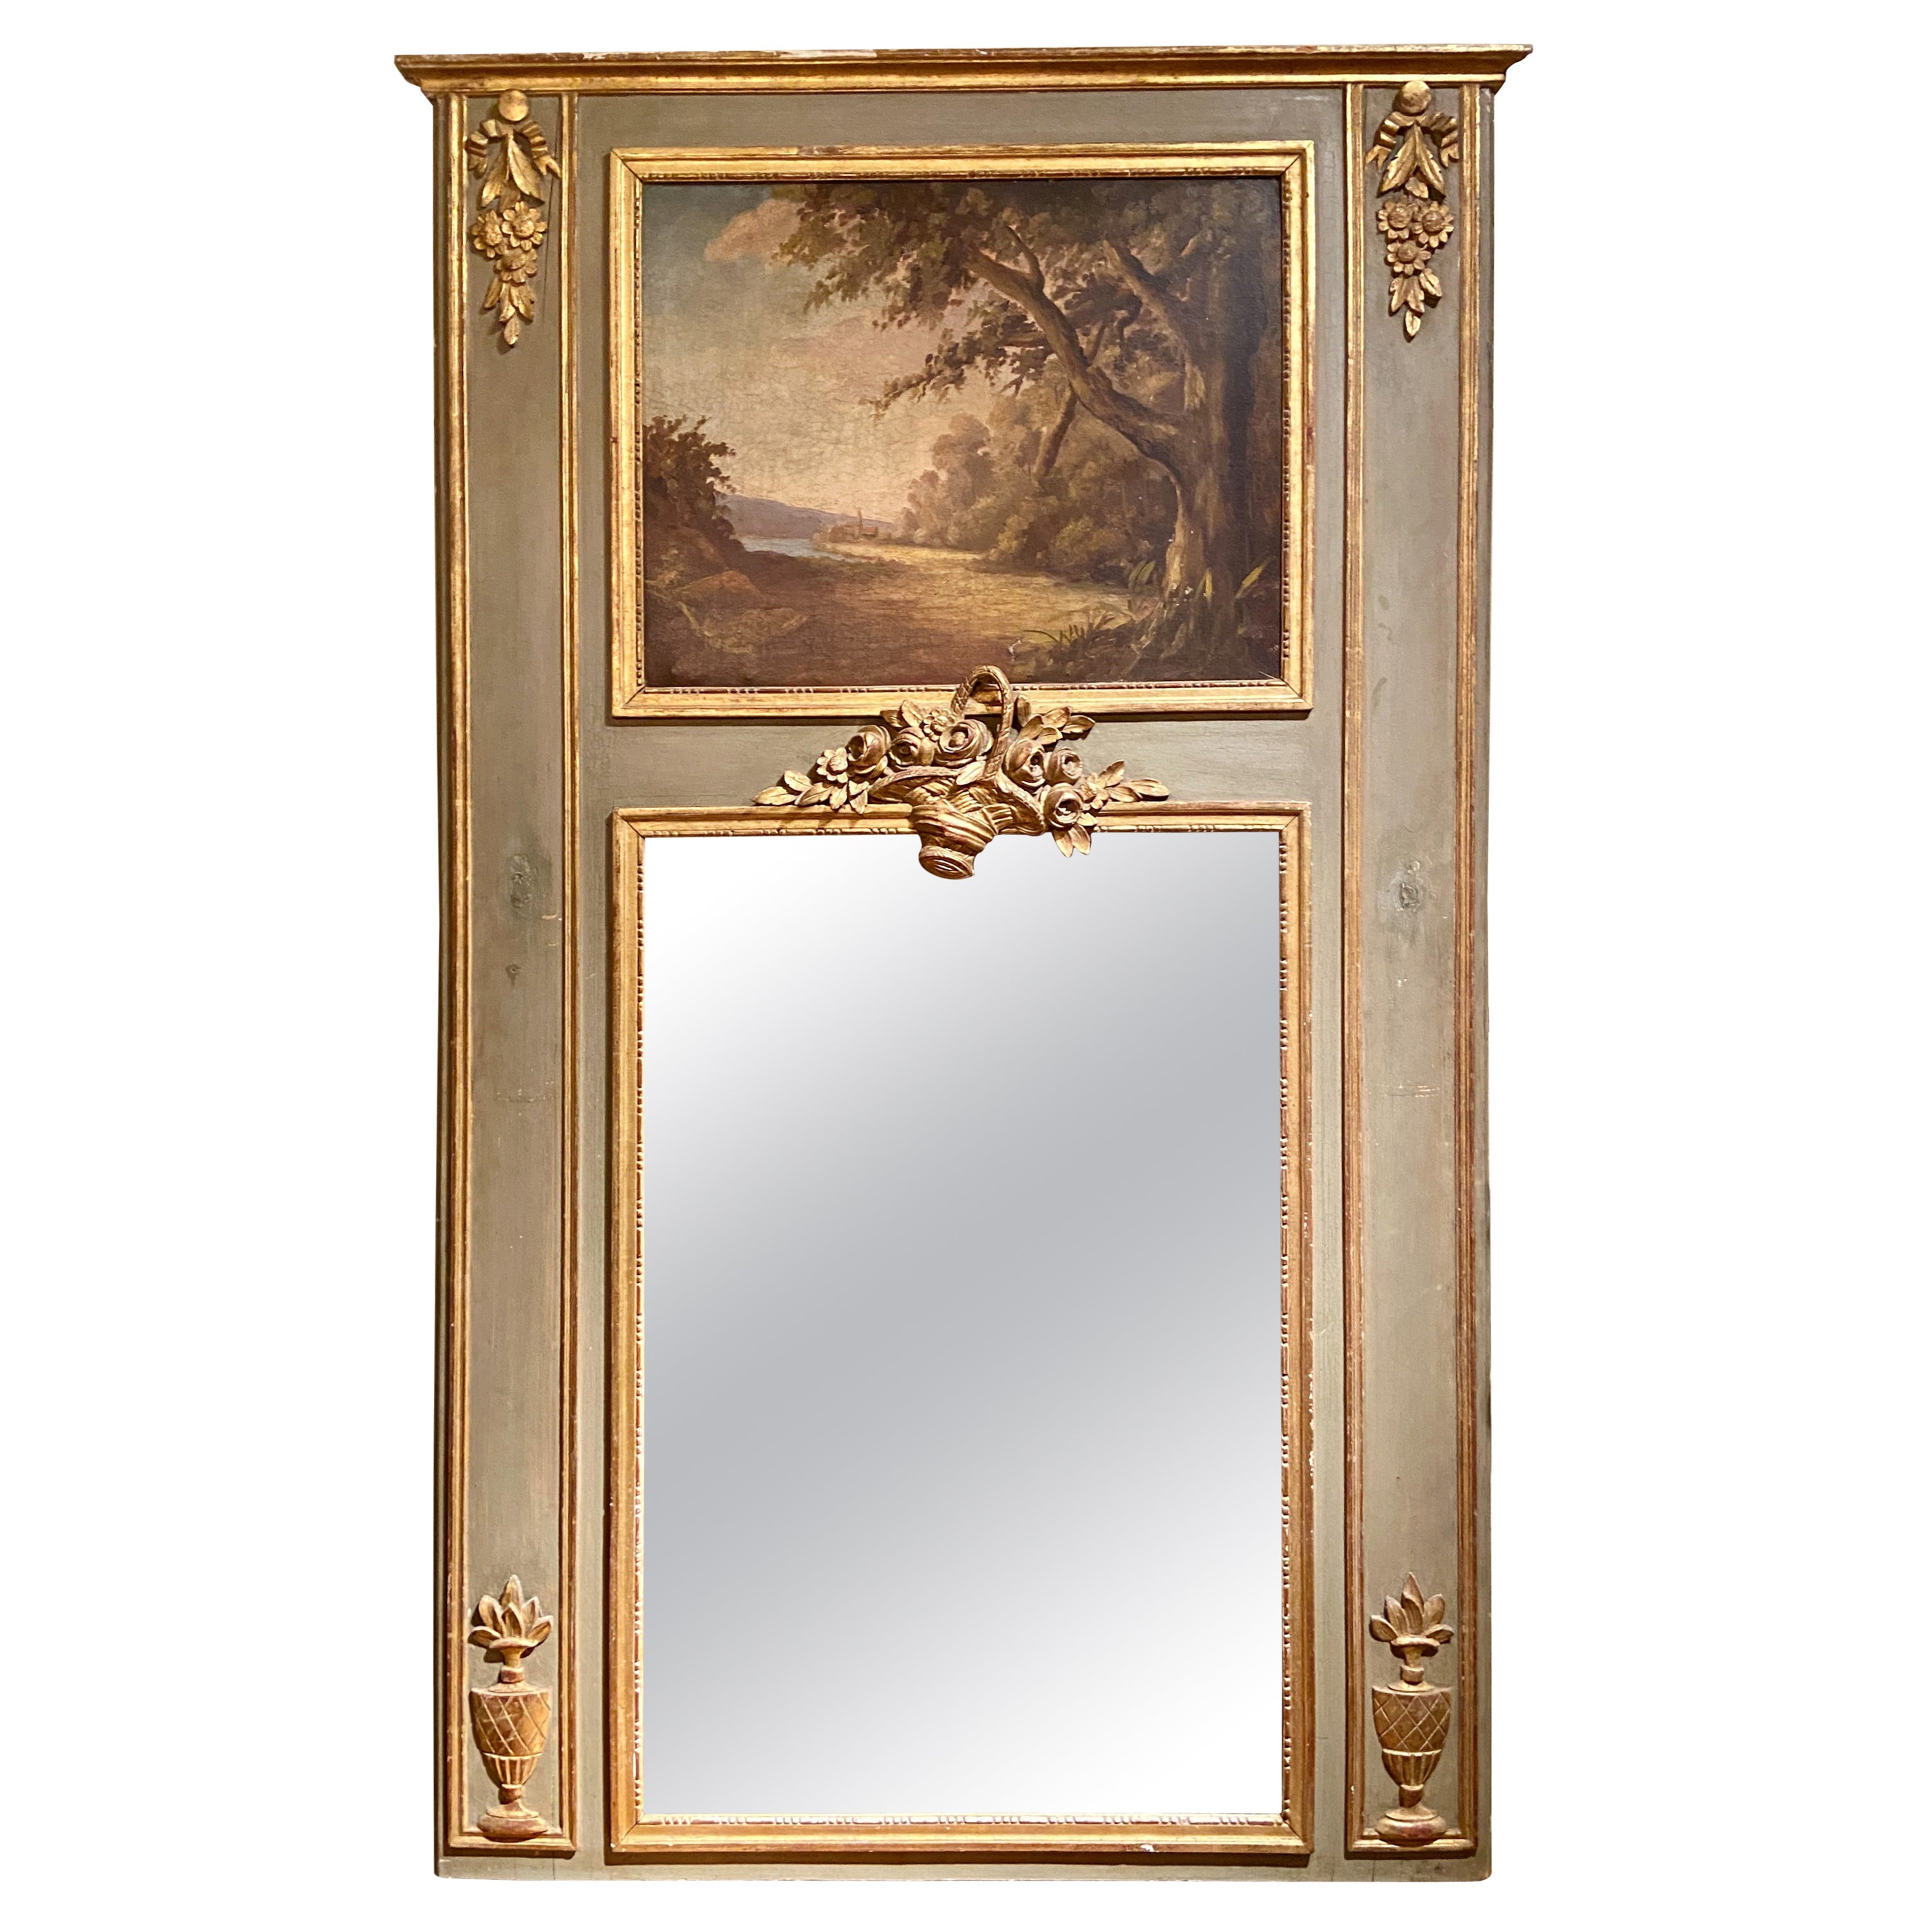 Antique French Provincial Trumeau Mirror with Landscape Scene, Circa 1880 For Sale